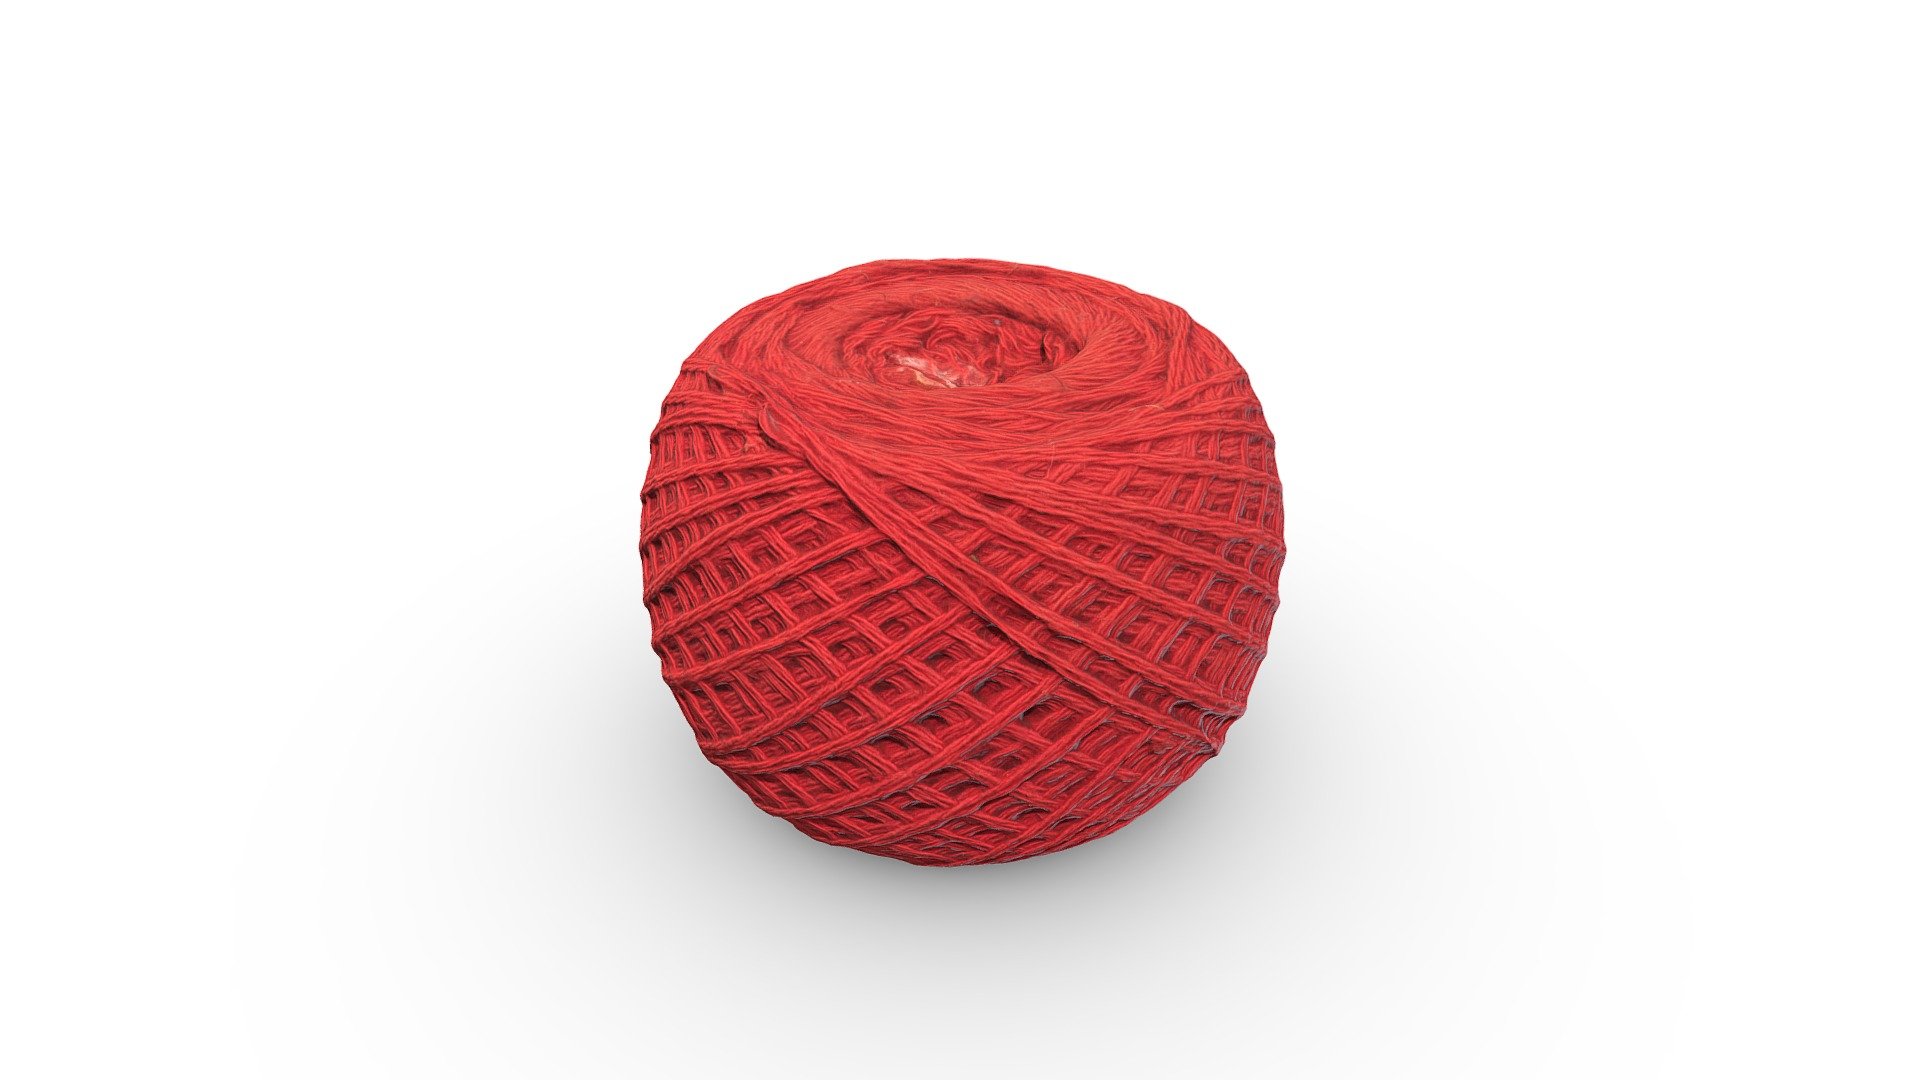 High-poly red ball of thread photogrammetry scan. PBR texture maps 4096x4096 px. resolution for metallic or specular workflow. Scan from real threads, high-poly 3D model, 4K resolution textures.

Additional file contains low-poly 3d model version, game-ready in real time 3d model